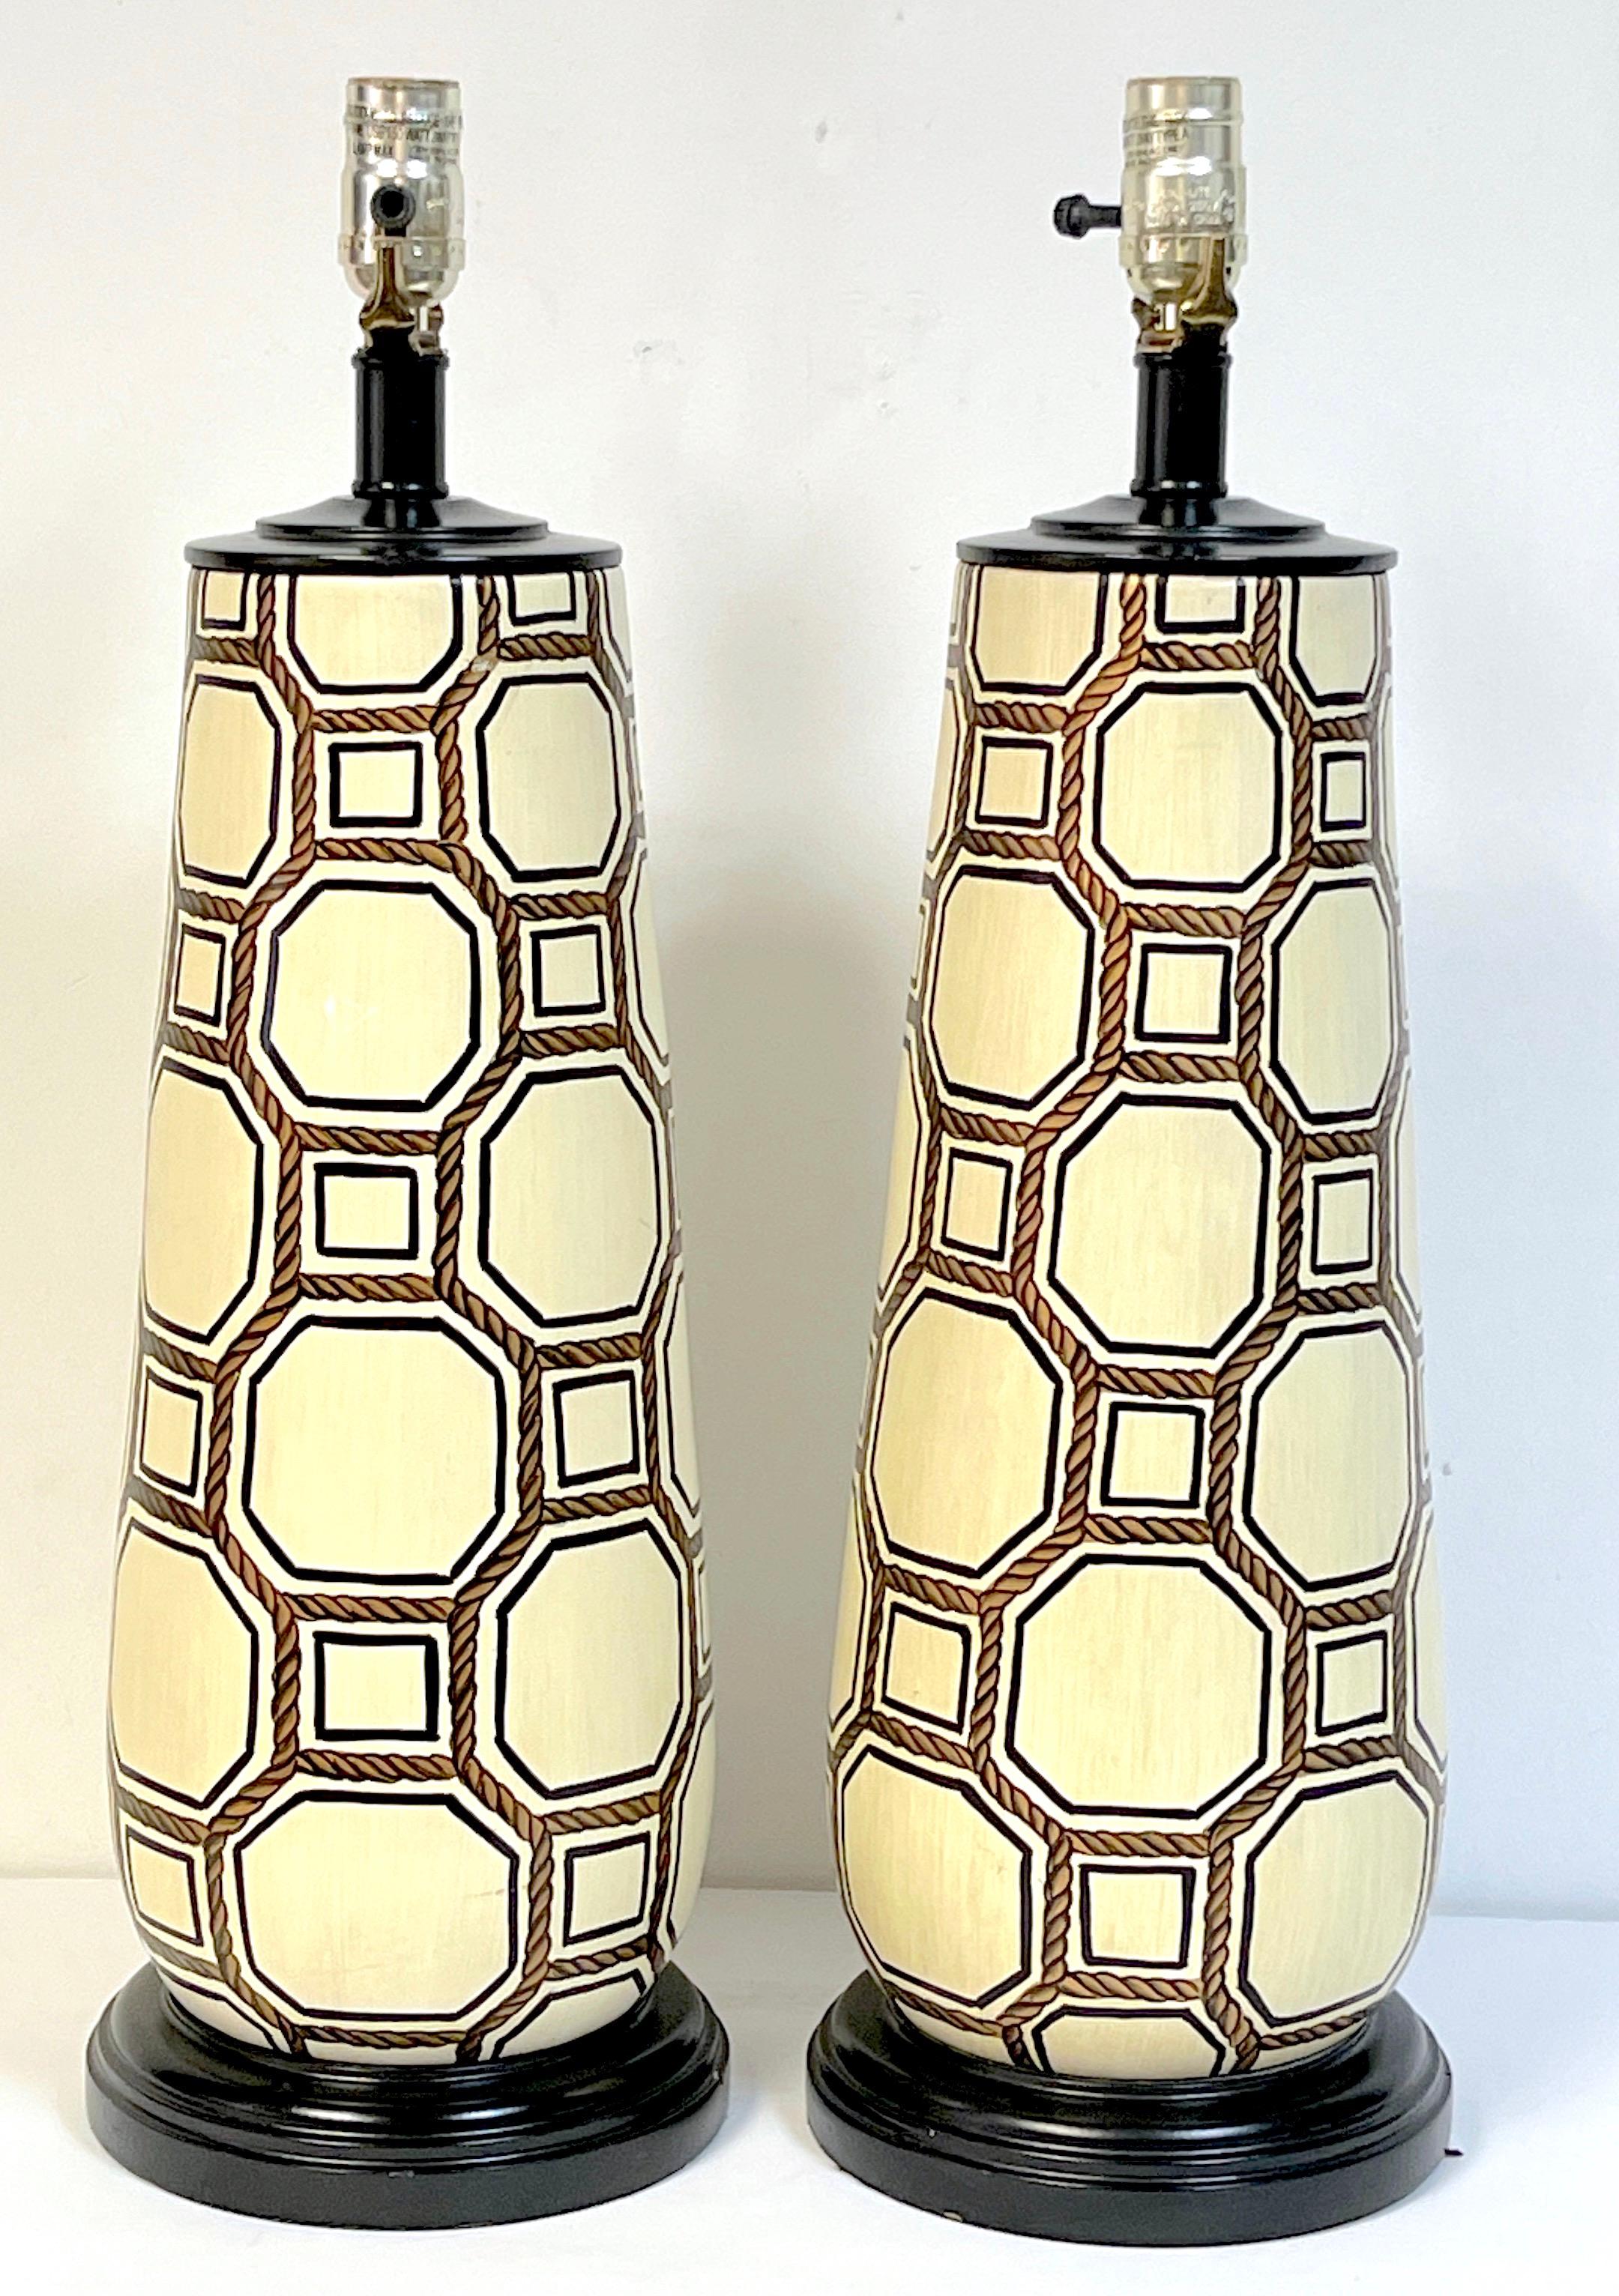 Pair Italian Pottery Geometric Rope Vignette Lamps, Manner of Gio Ponti  
Italy, circa 1960s
A tall pair of sleek and subtle Italian Mid-Century pottery lamps, influenced by Gio Ponti designs. Each one of off white/cream 'Eggshell' pottery,